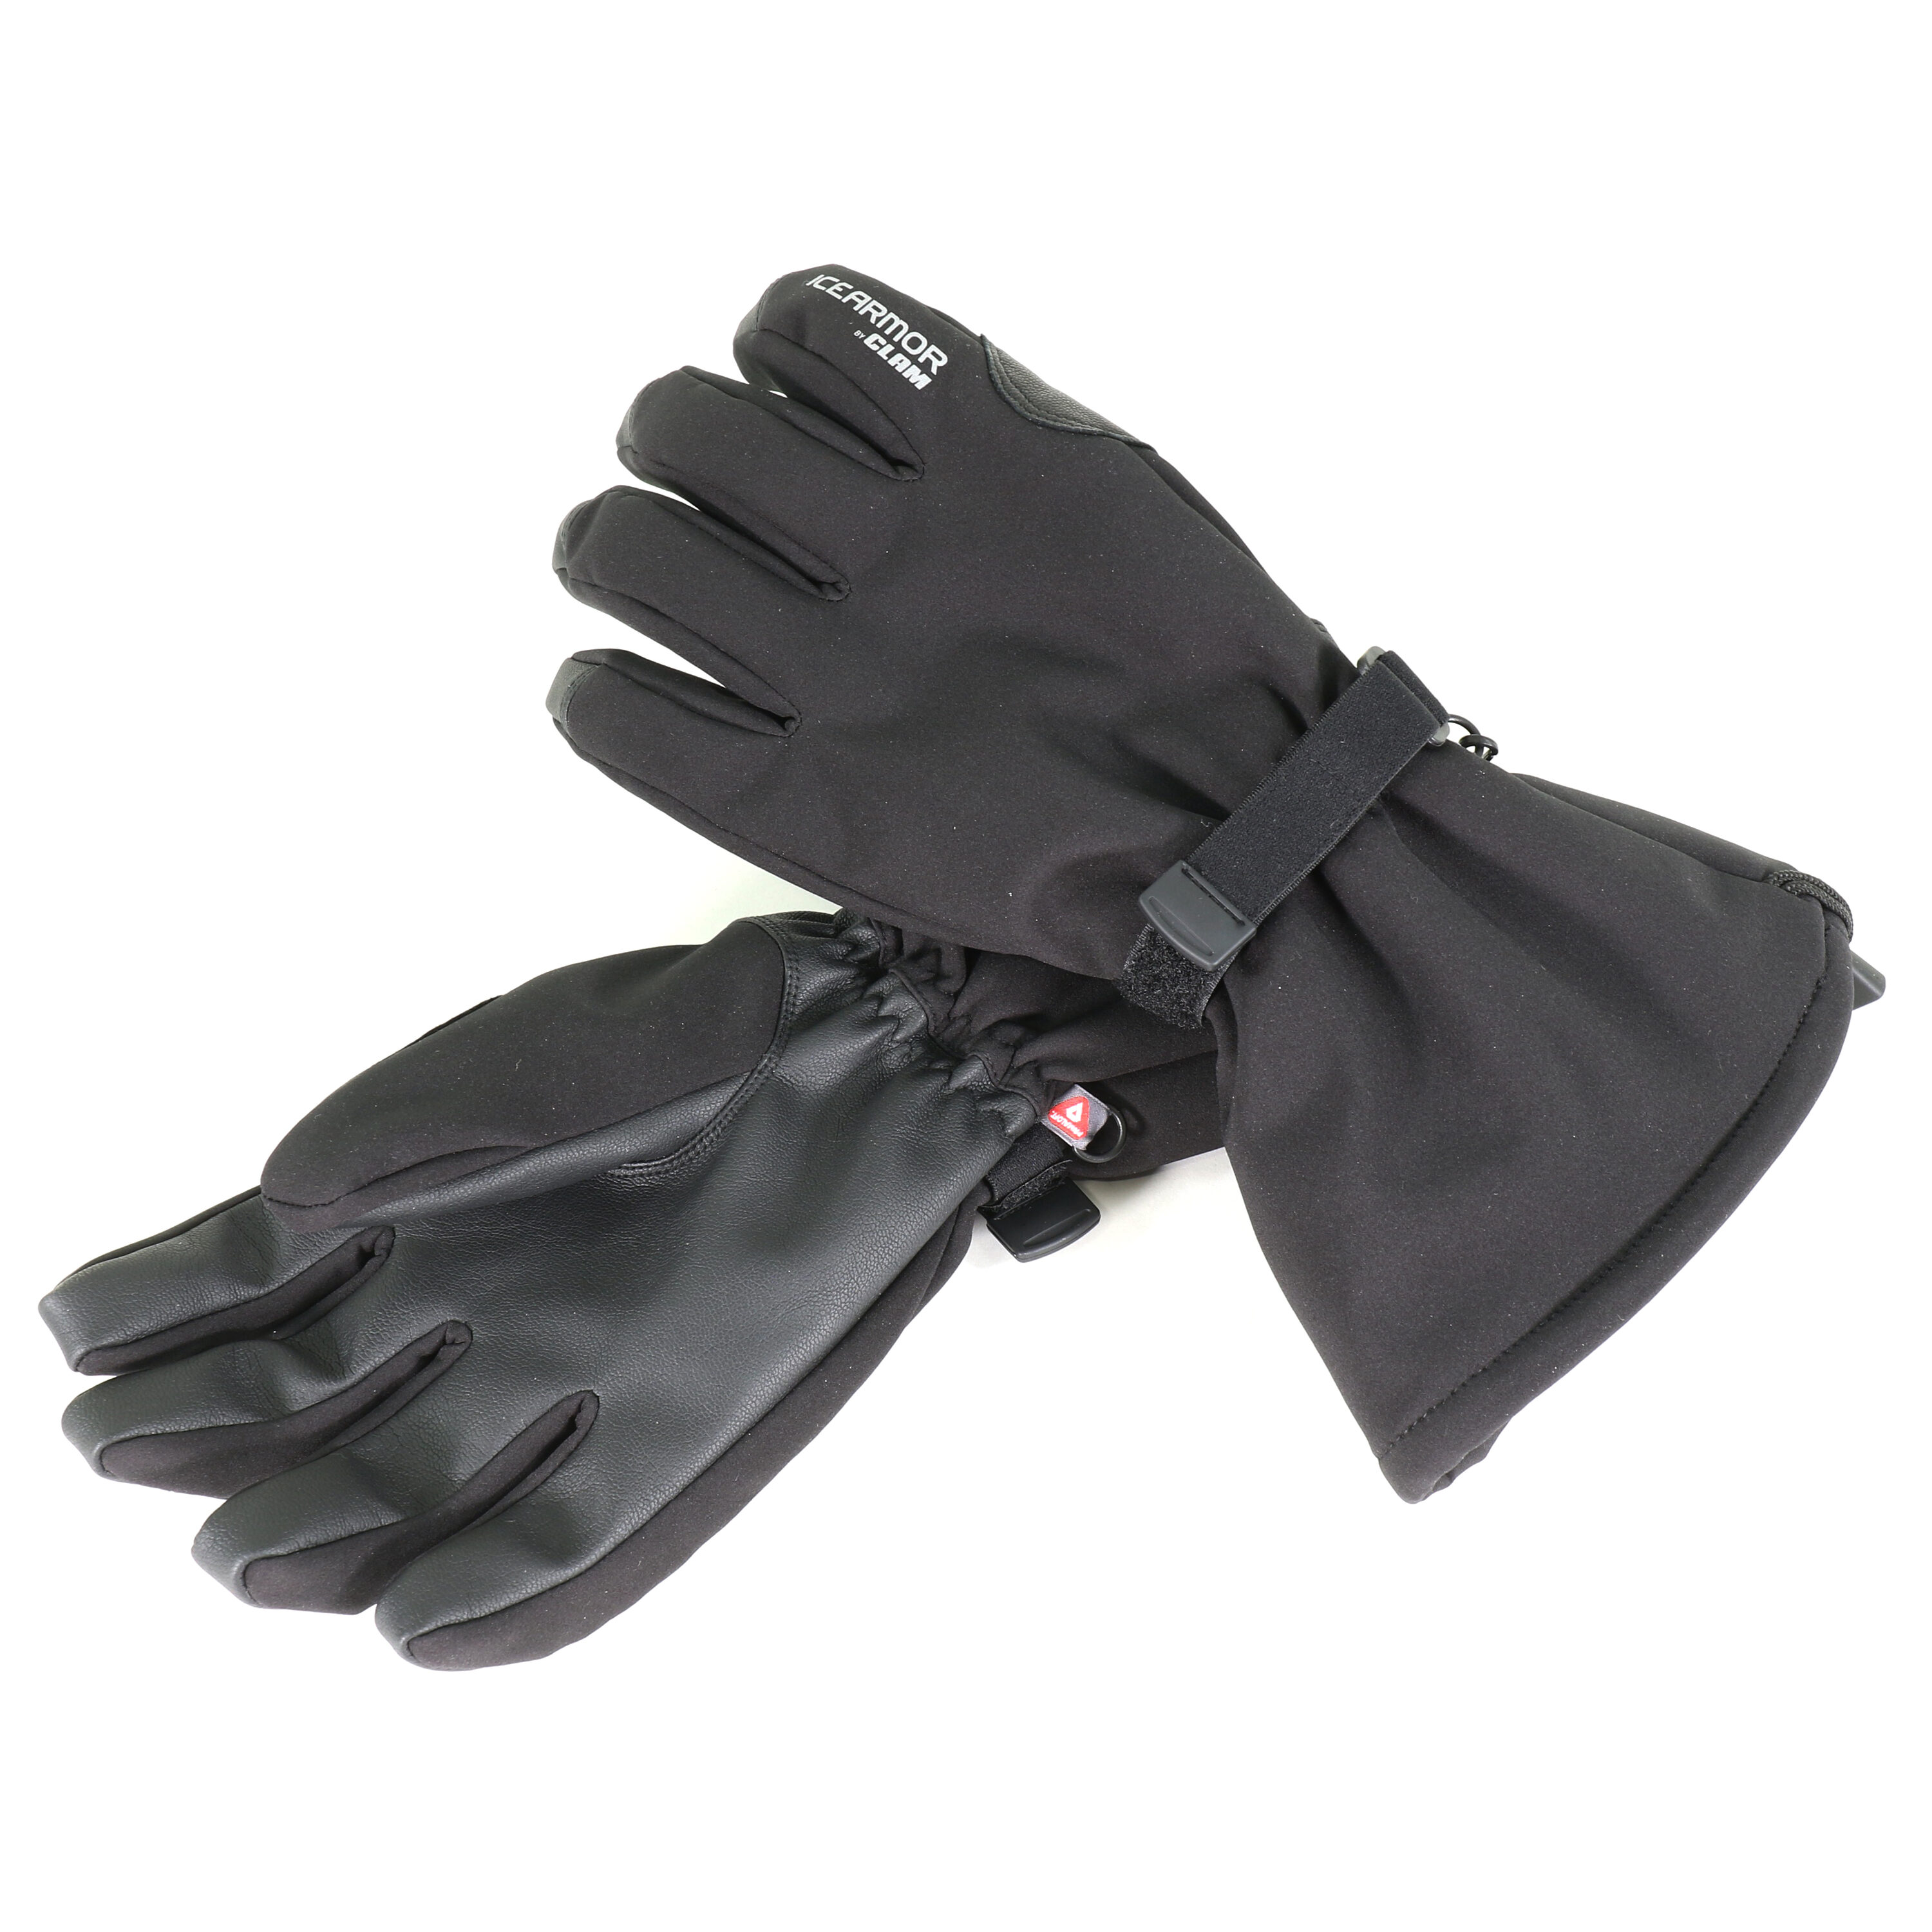 Clam Outdoors Extreme Ice Fishing Glove - 2XL at